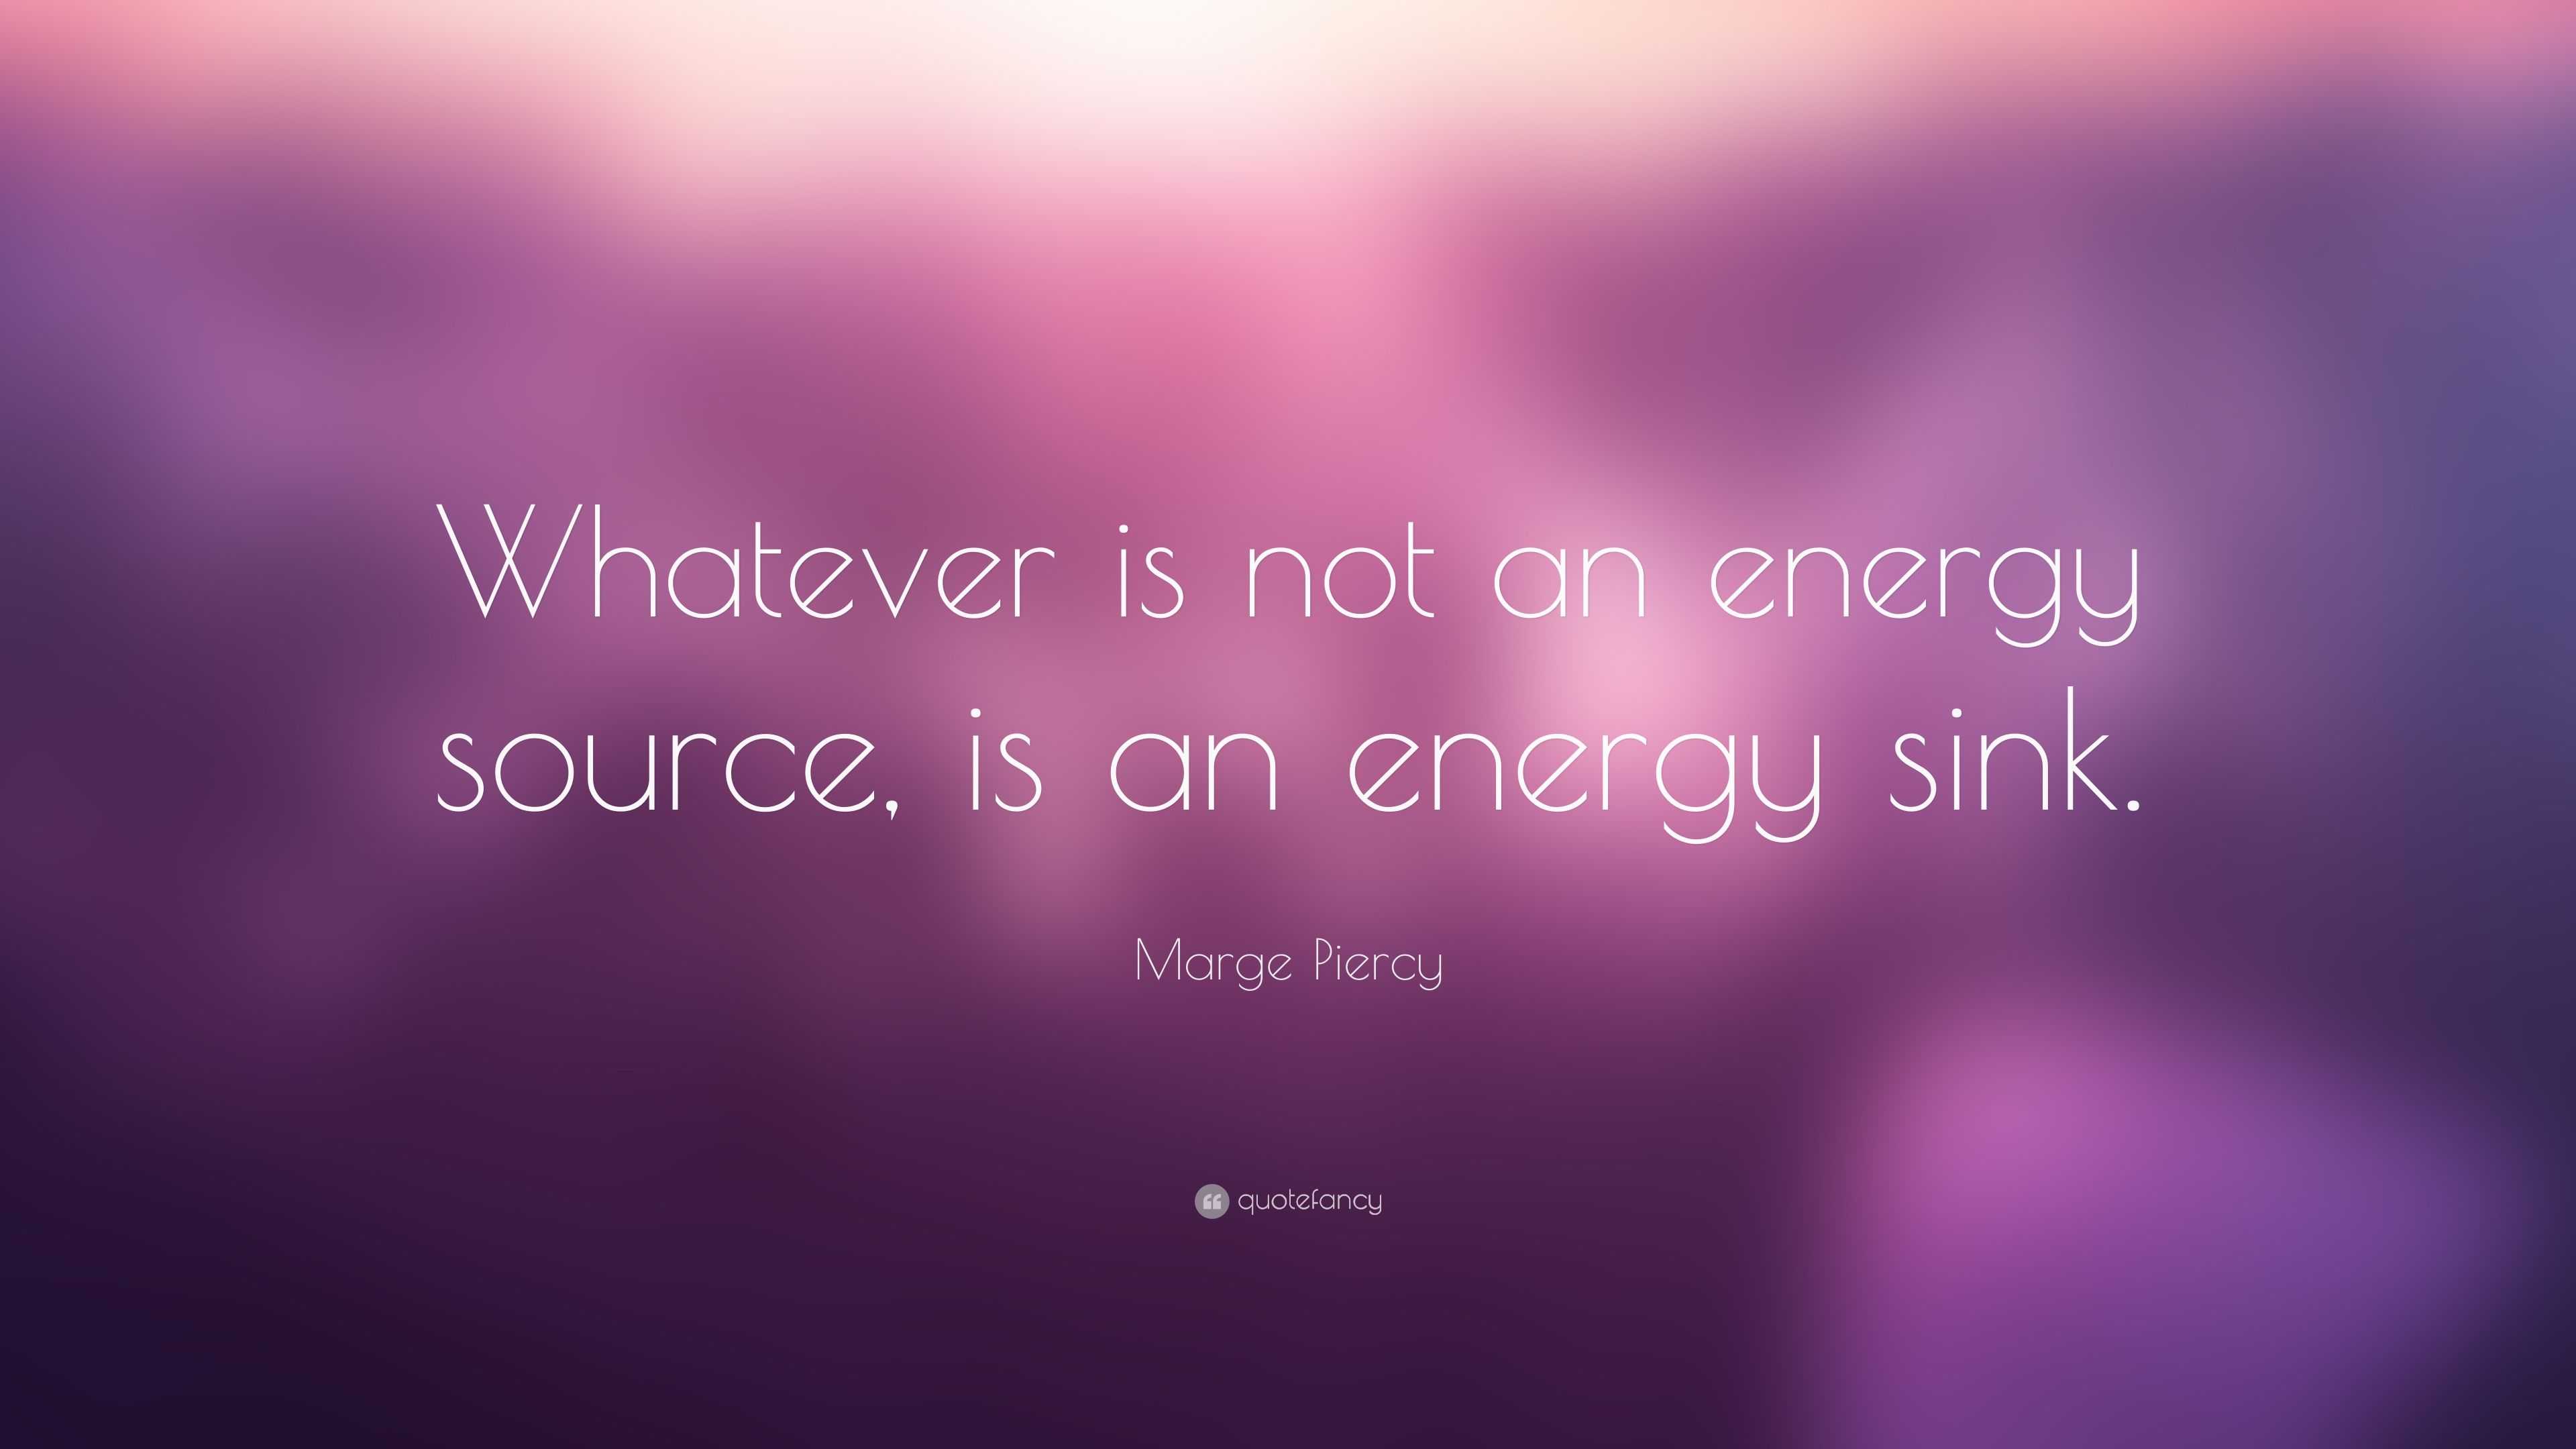 Marge Piercy Quote: “Whatever is not an energy source, is an energy sink.”